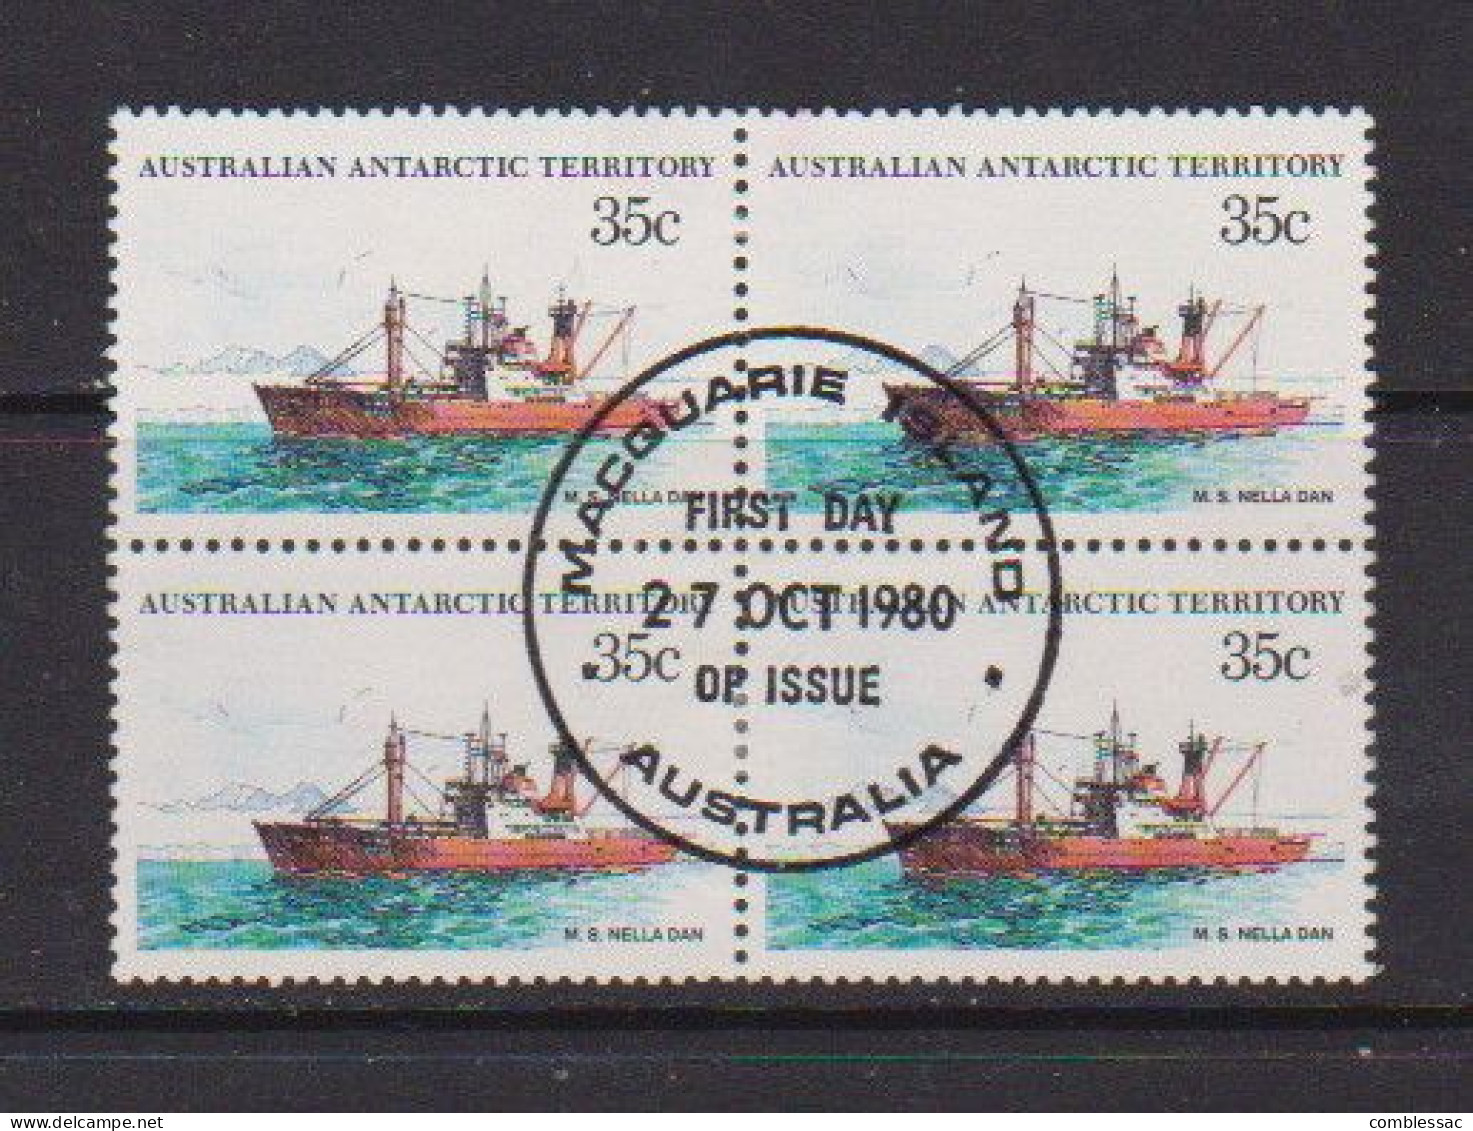 AUSTRALIAN  ANTARCTIC  TERRITORY    1980  Ships  35c  Block  Of  4  Post Marked  Firct  Day  Of  Issue  27th Oct  1980 - Usados